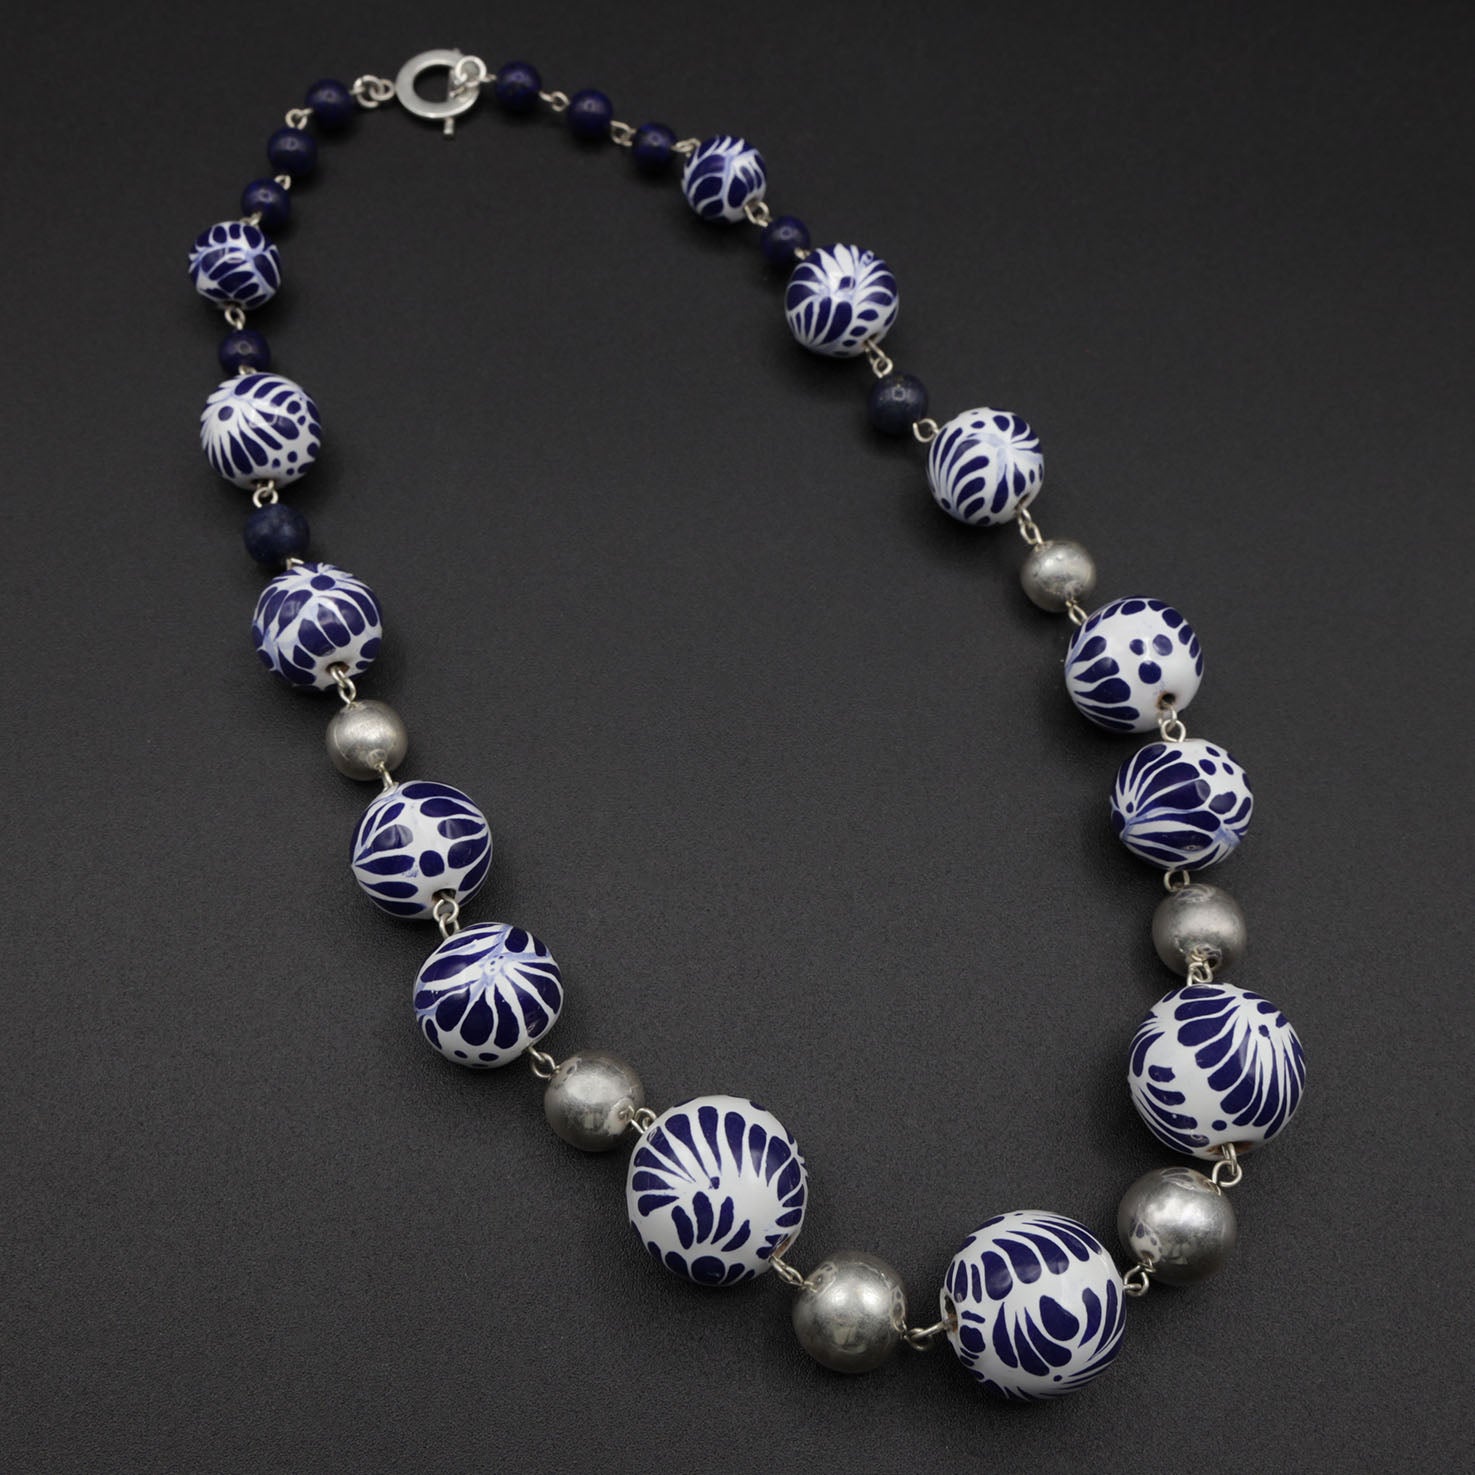 Sterling Silver Talavera Beads Statement Necklace